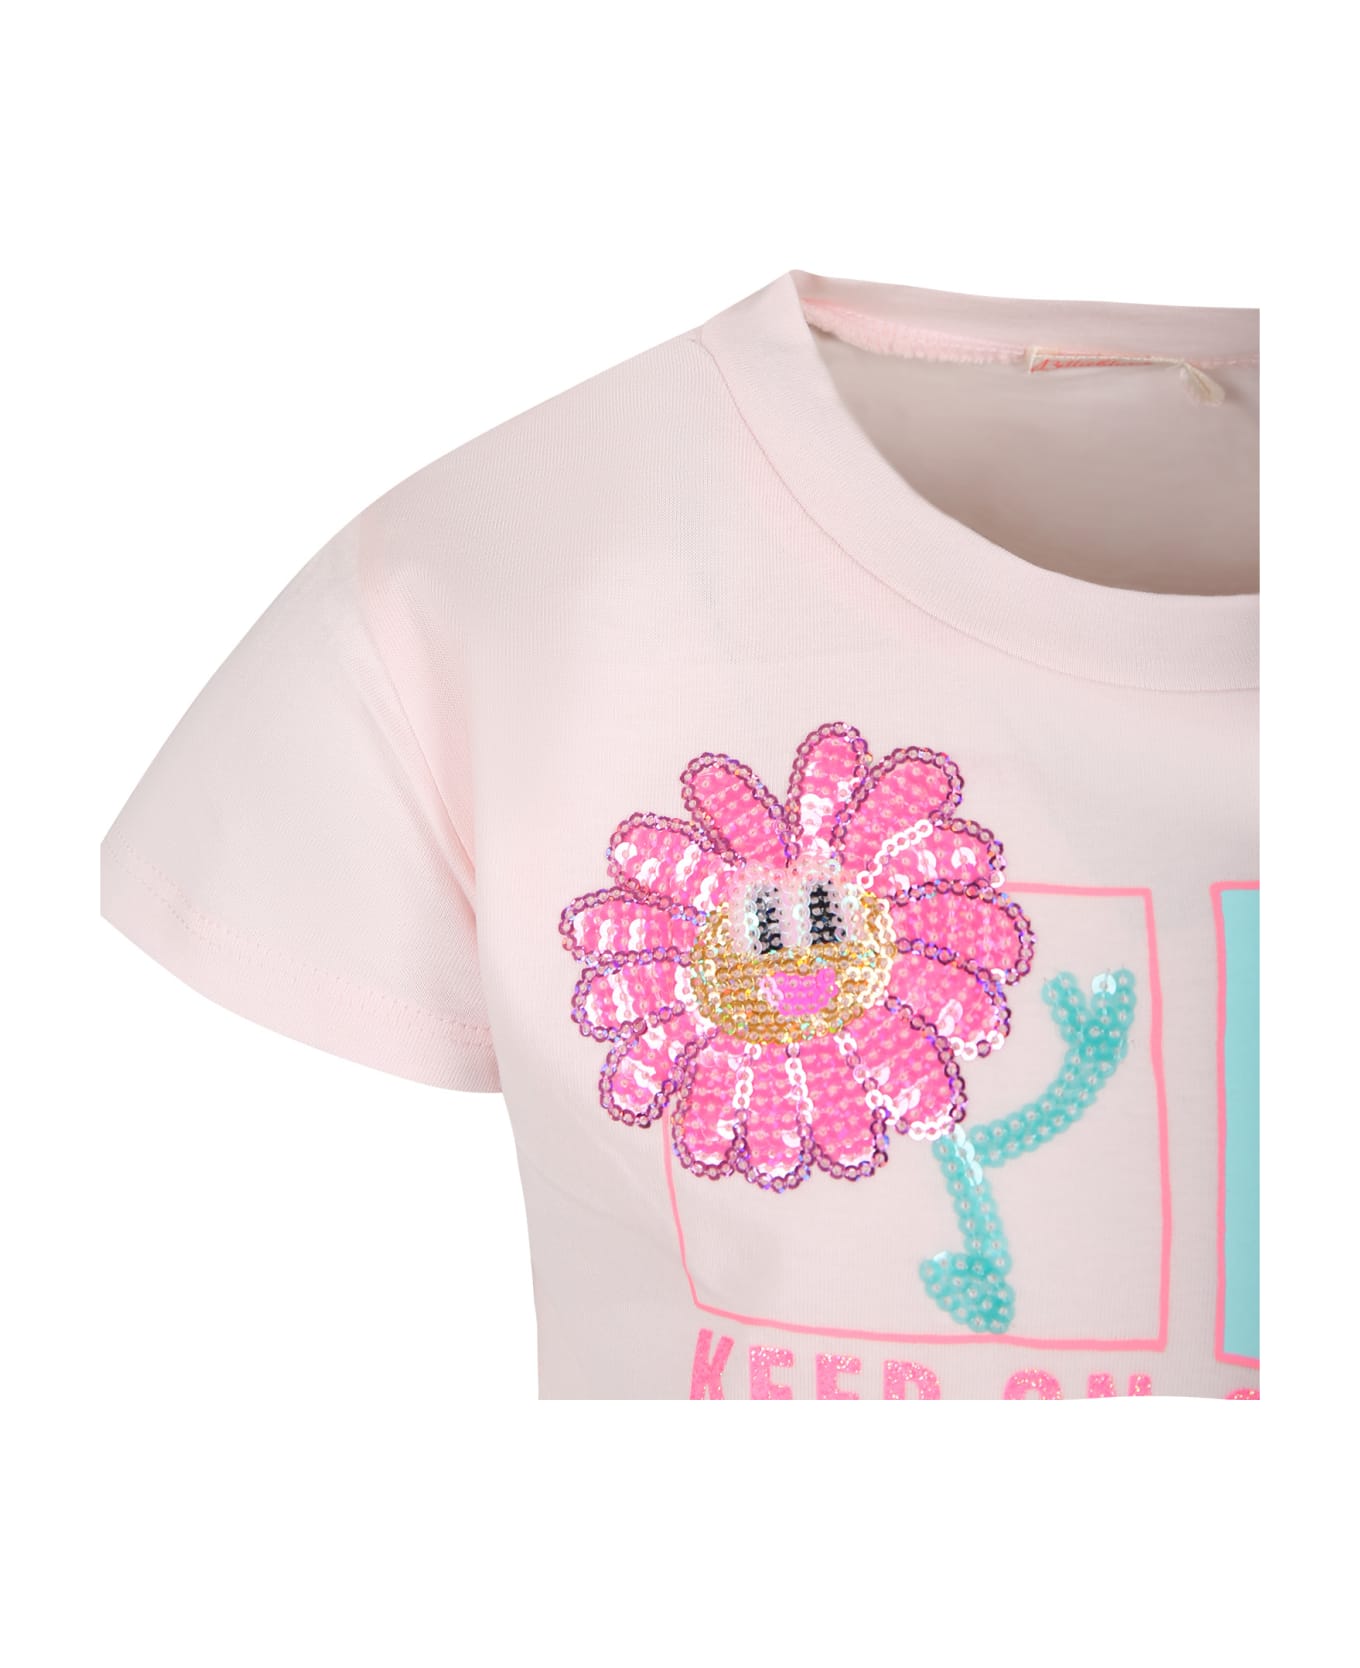 Billieblush Pink T-shirt For Girl With Multicolor Print - Pink